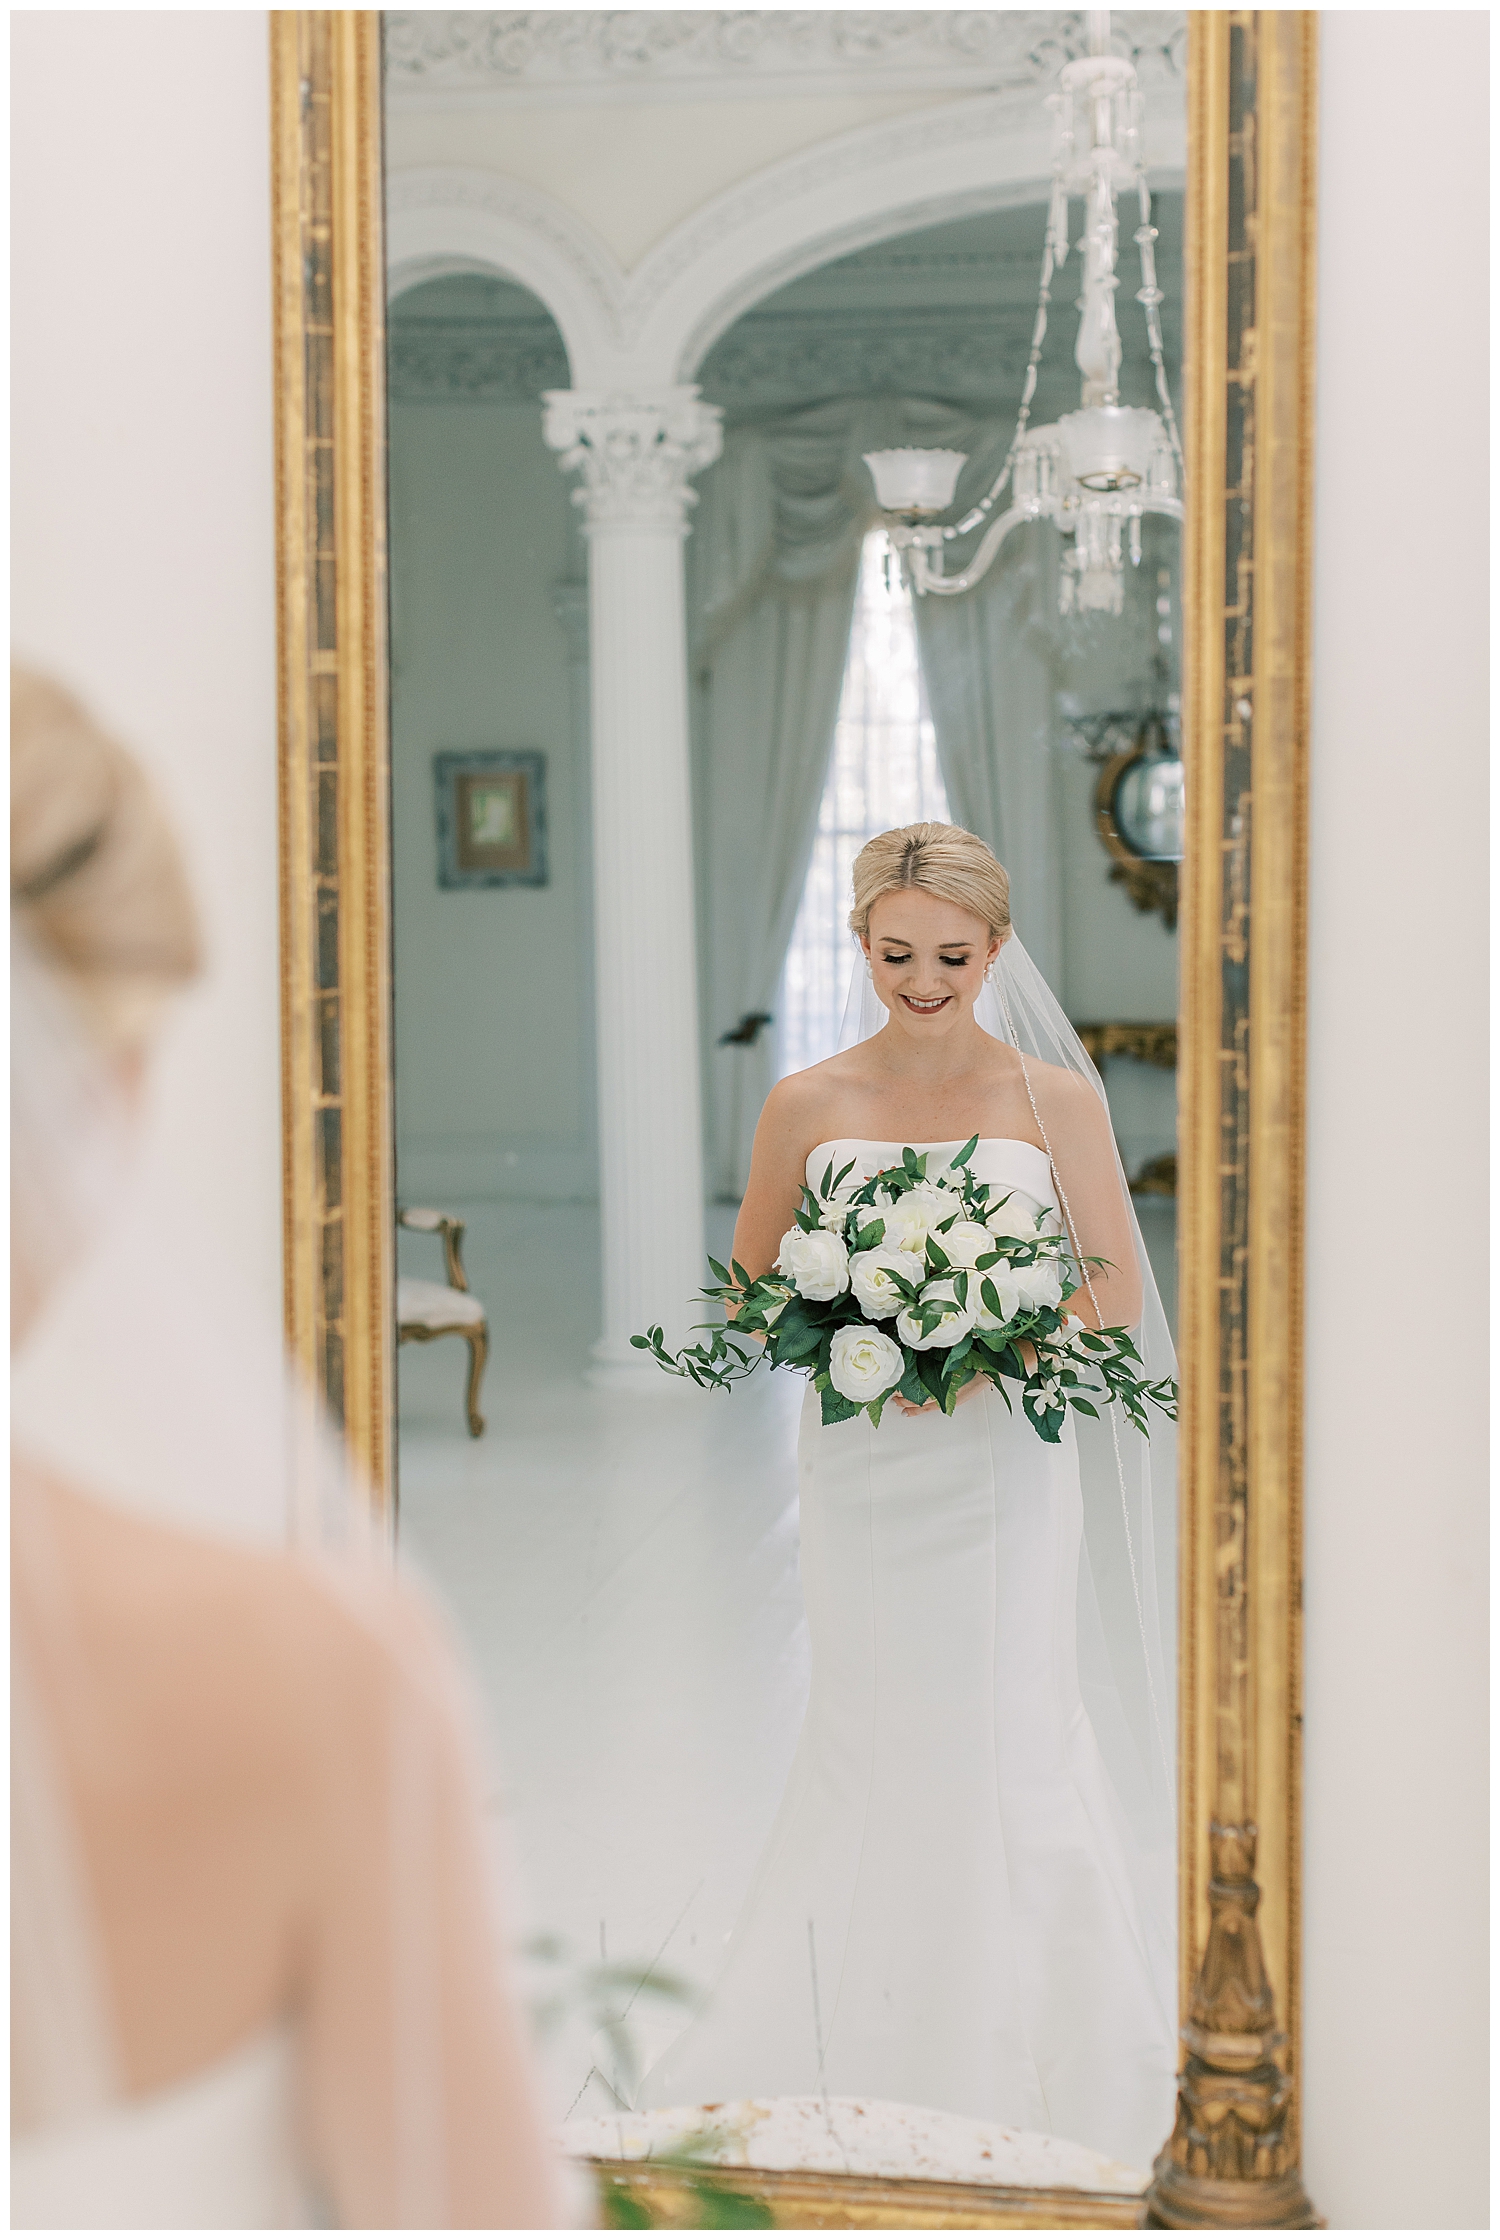 A bride looks in a mirror in a white room.